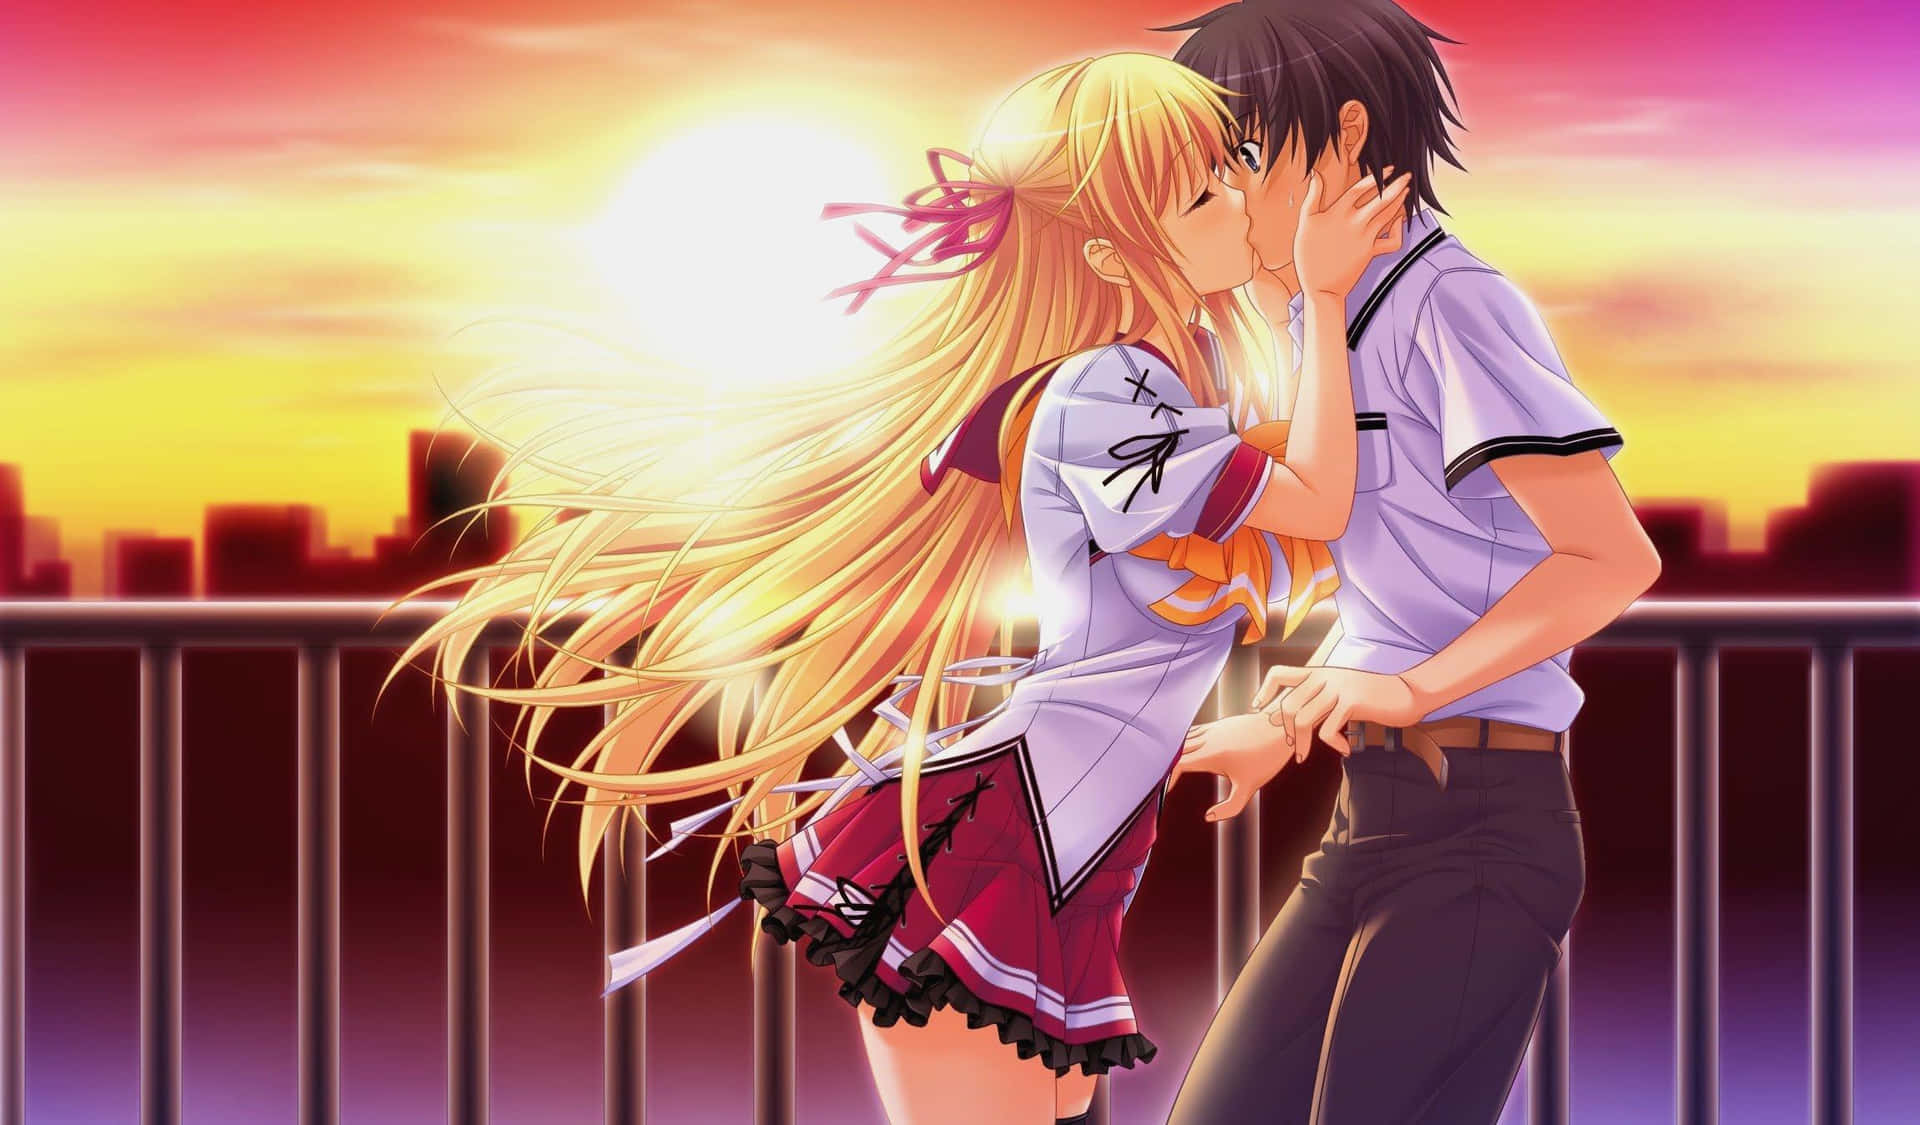 Anime Couple Kissing On The Bridge Picture